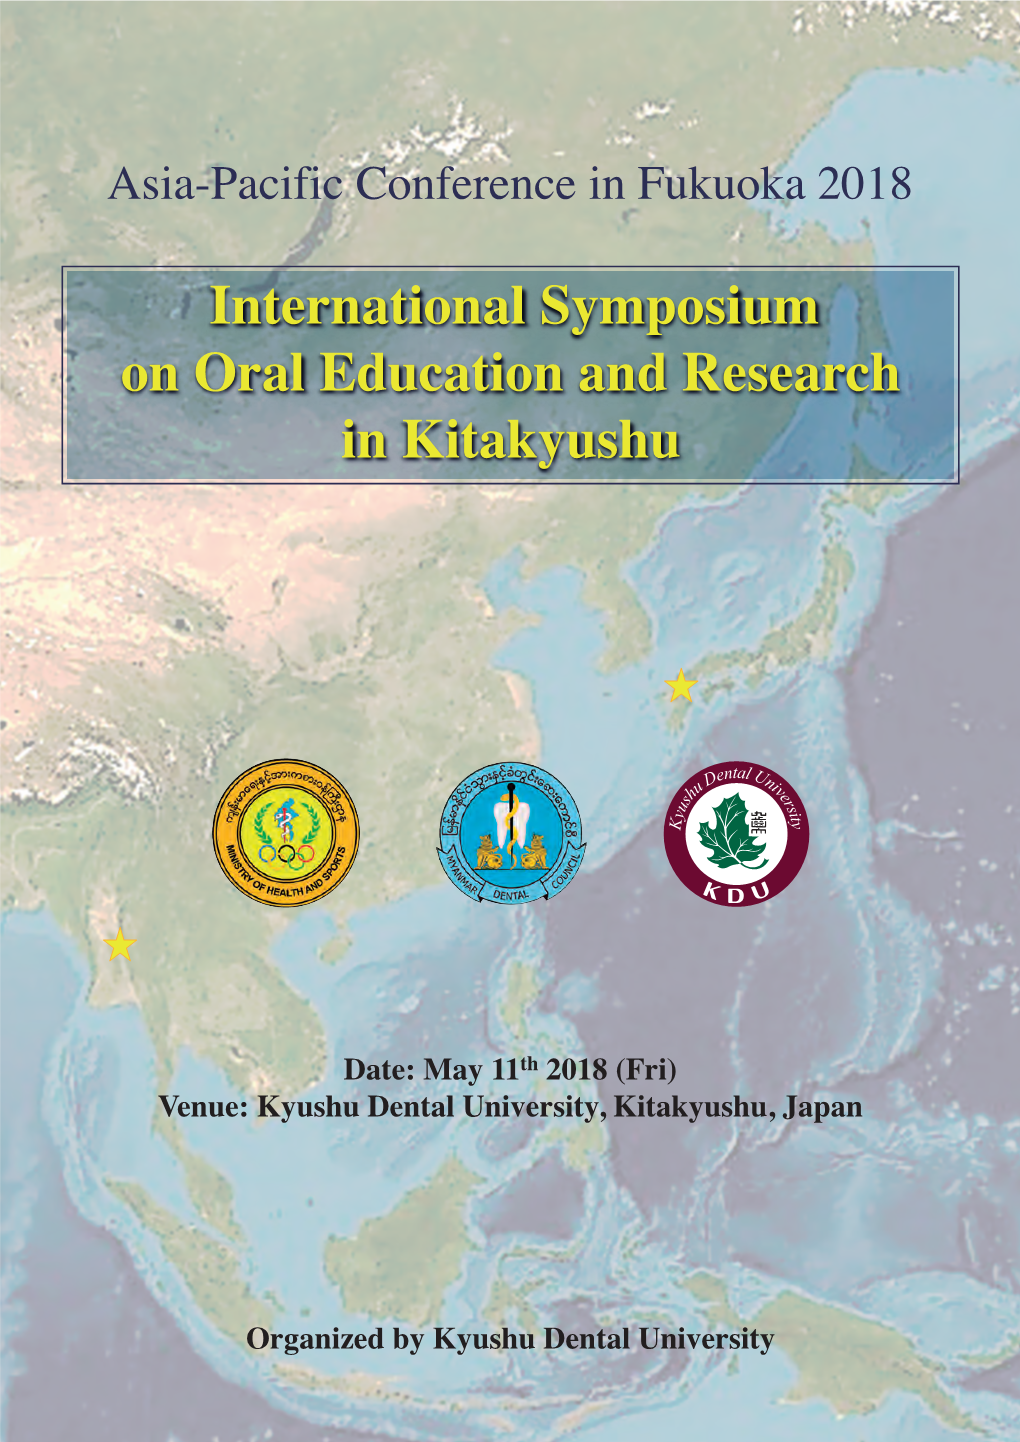 International Symposium on Oral Education and Research in Kitakyushu